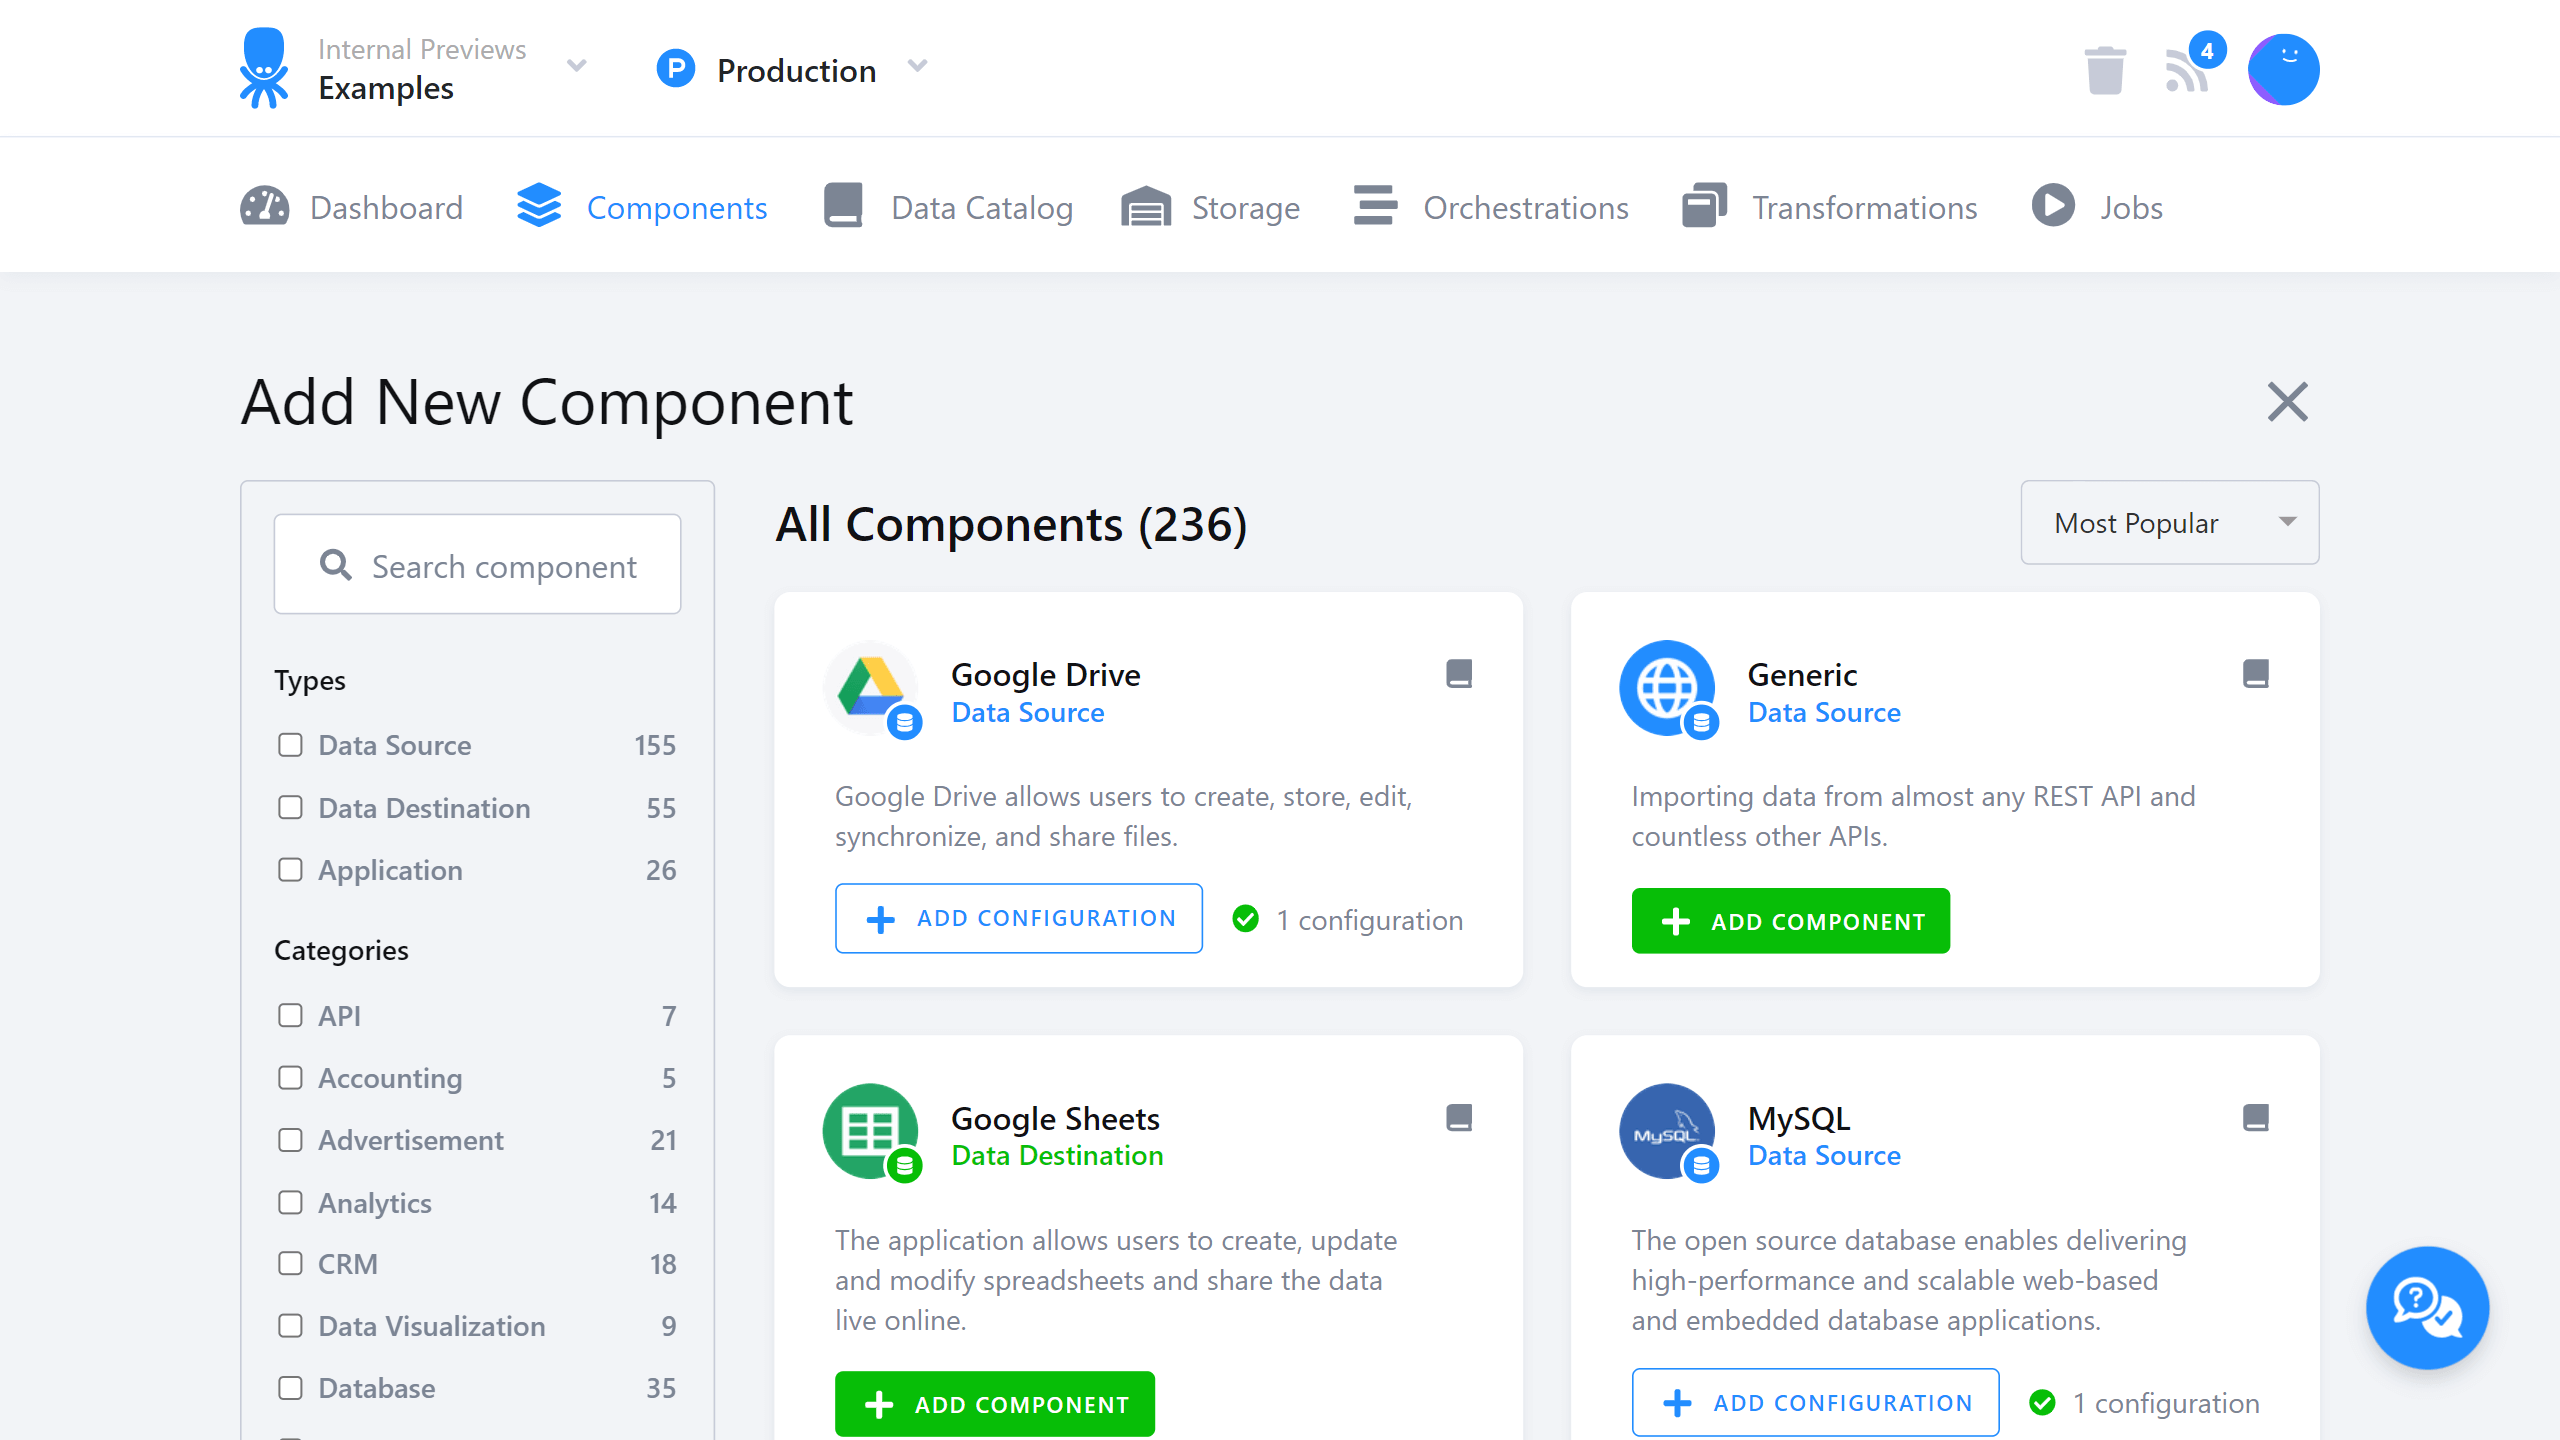 Simplified Components Page